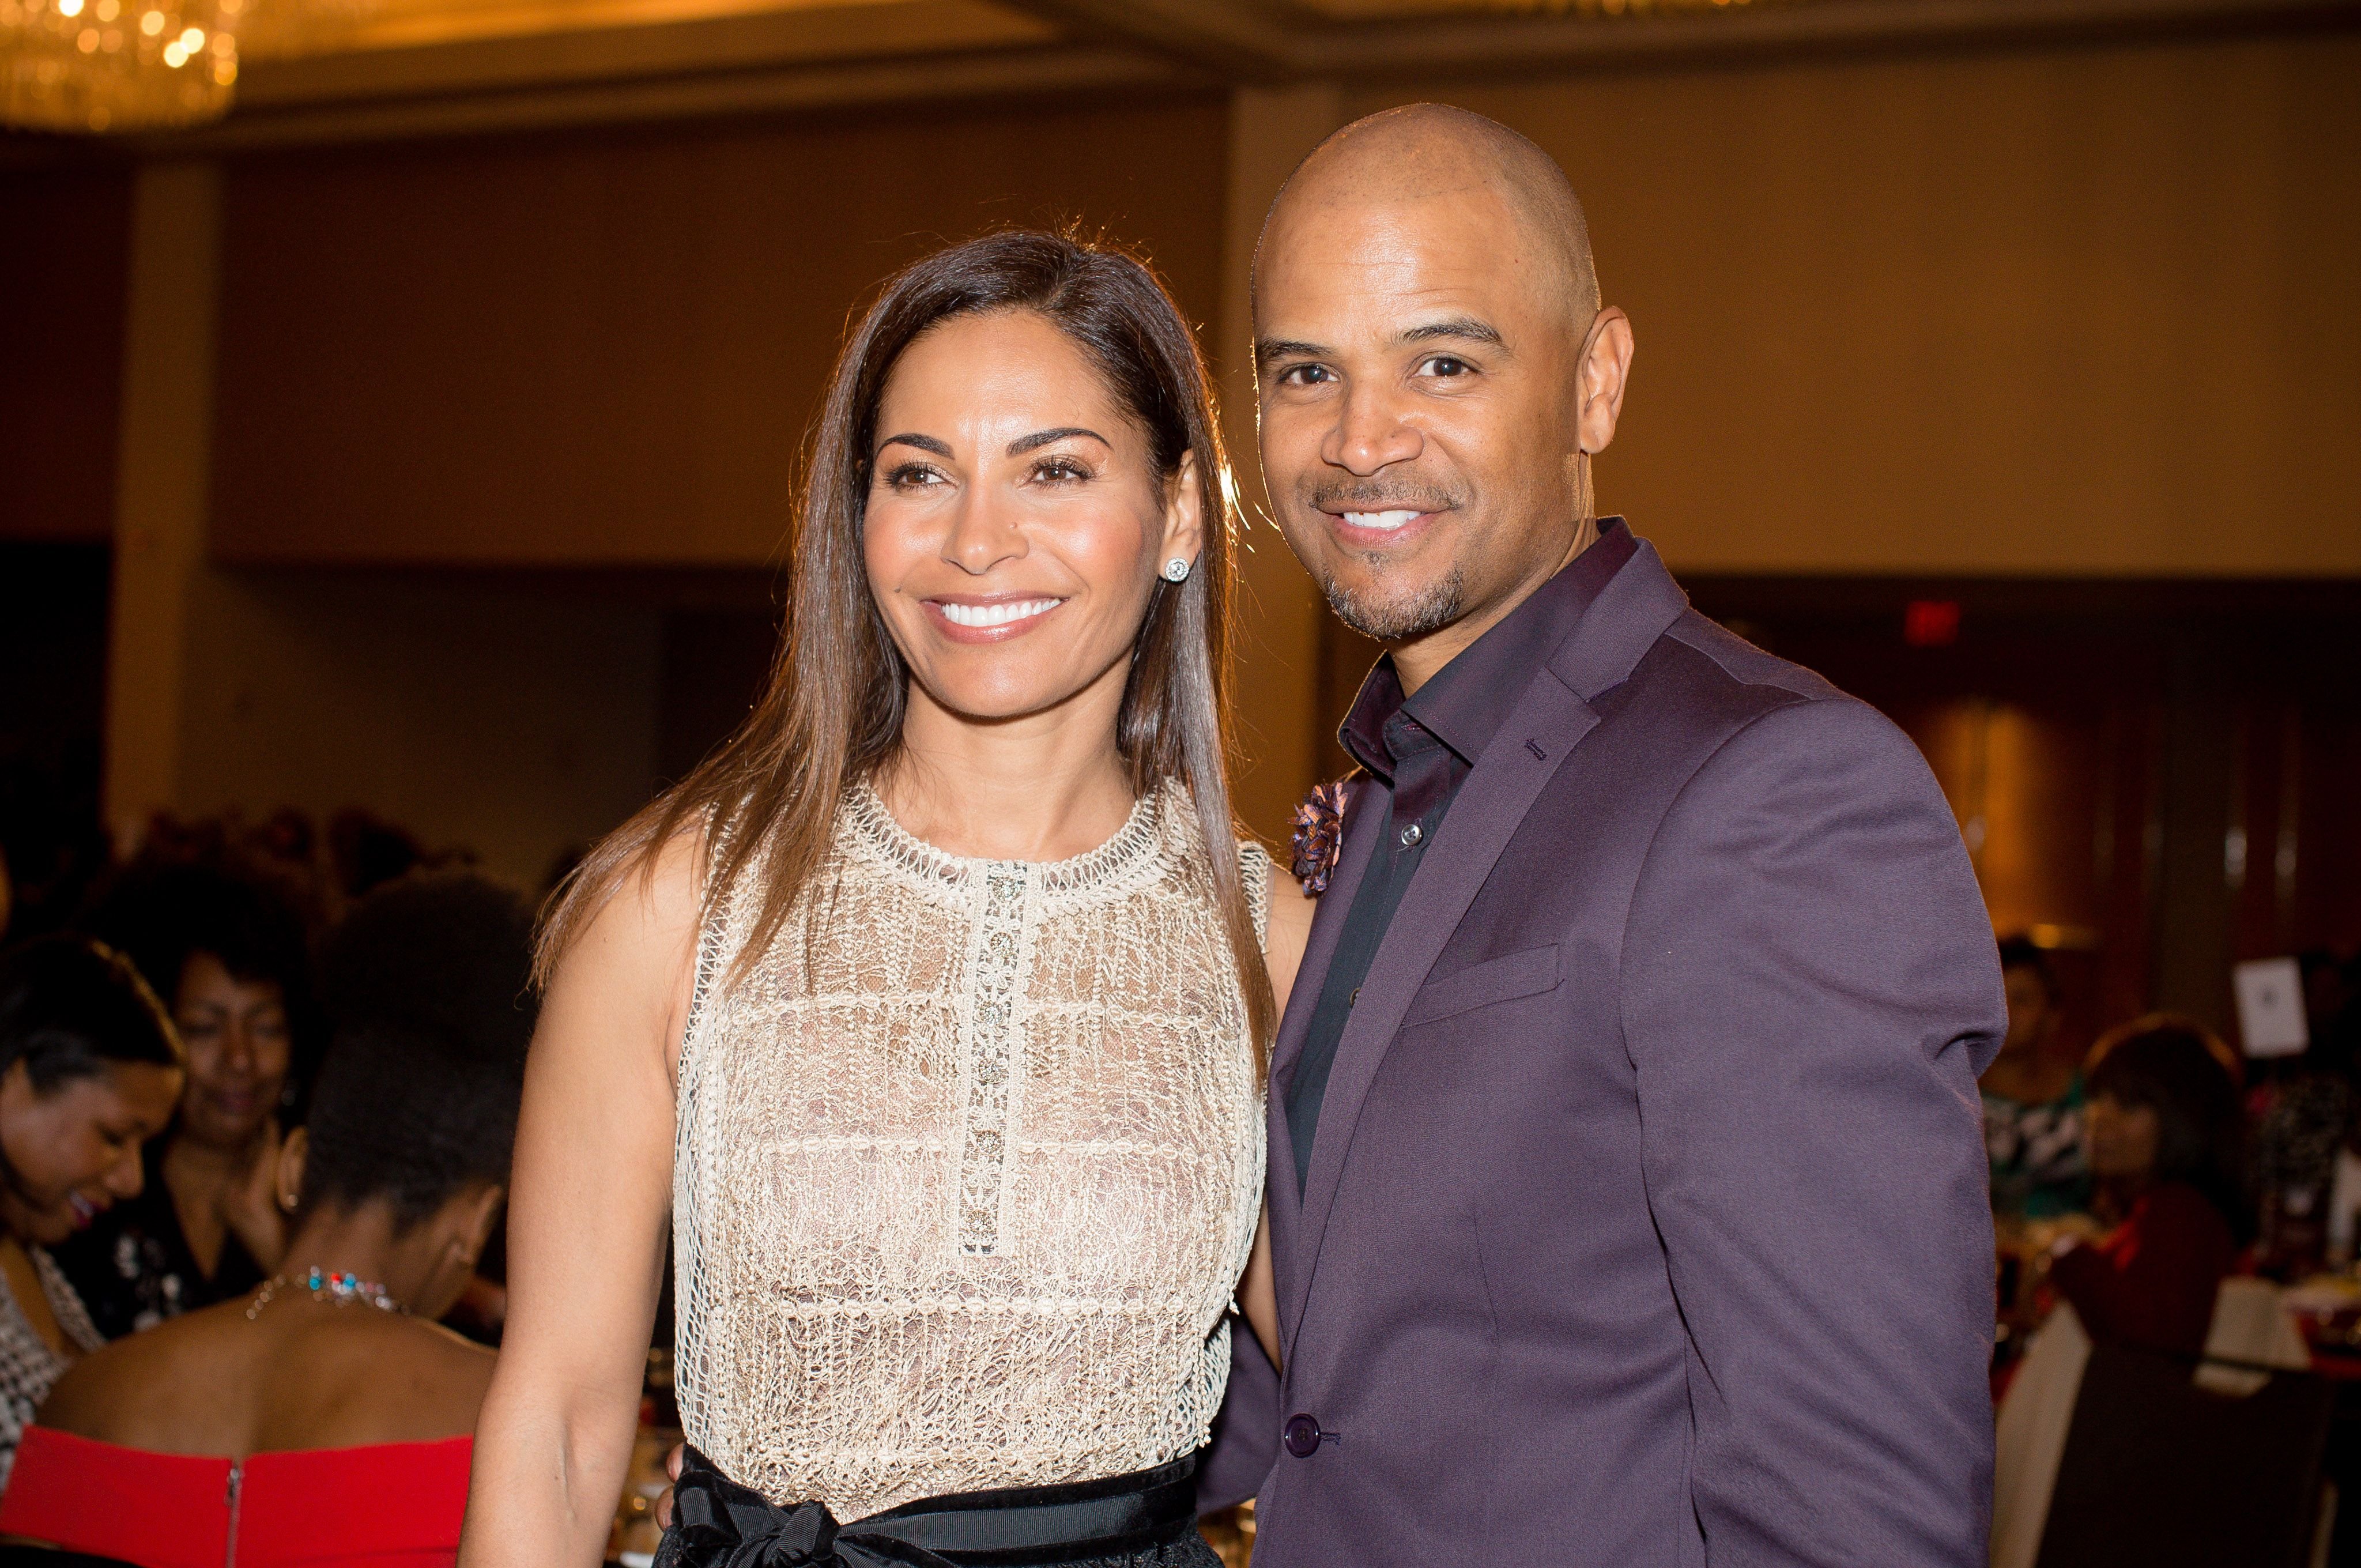 Salli Richardson Whitfield and Dondre Whitfield at the 2017 Black Women Film Summit awards luncheon at Atlanta Marriott Marquis on March 3, 2017. | Photo: Getty Images